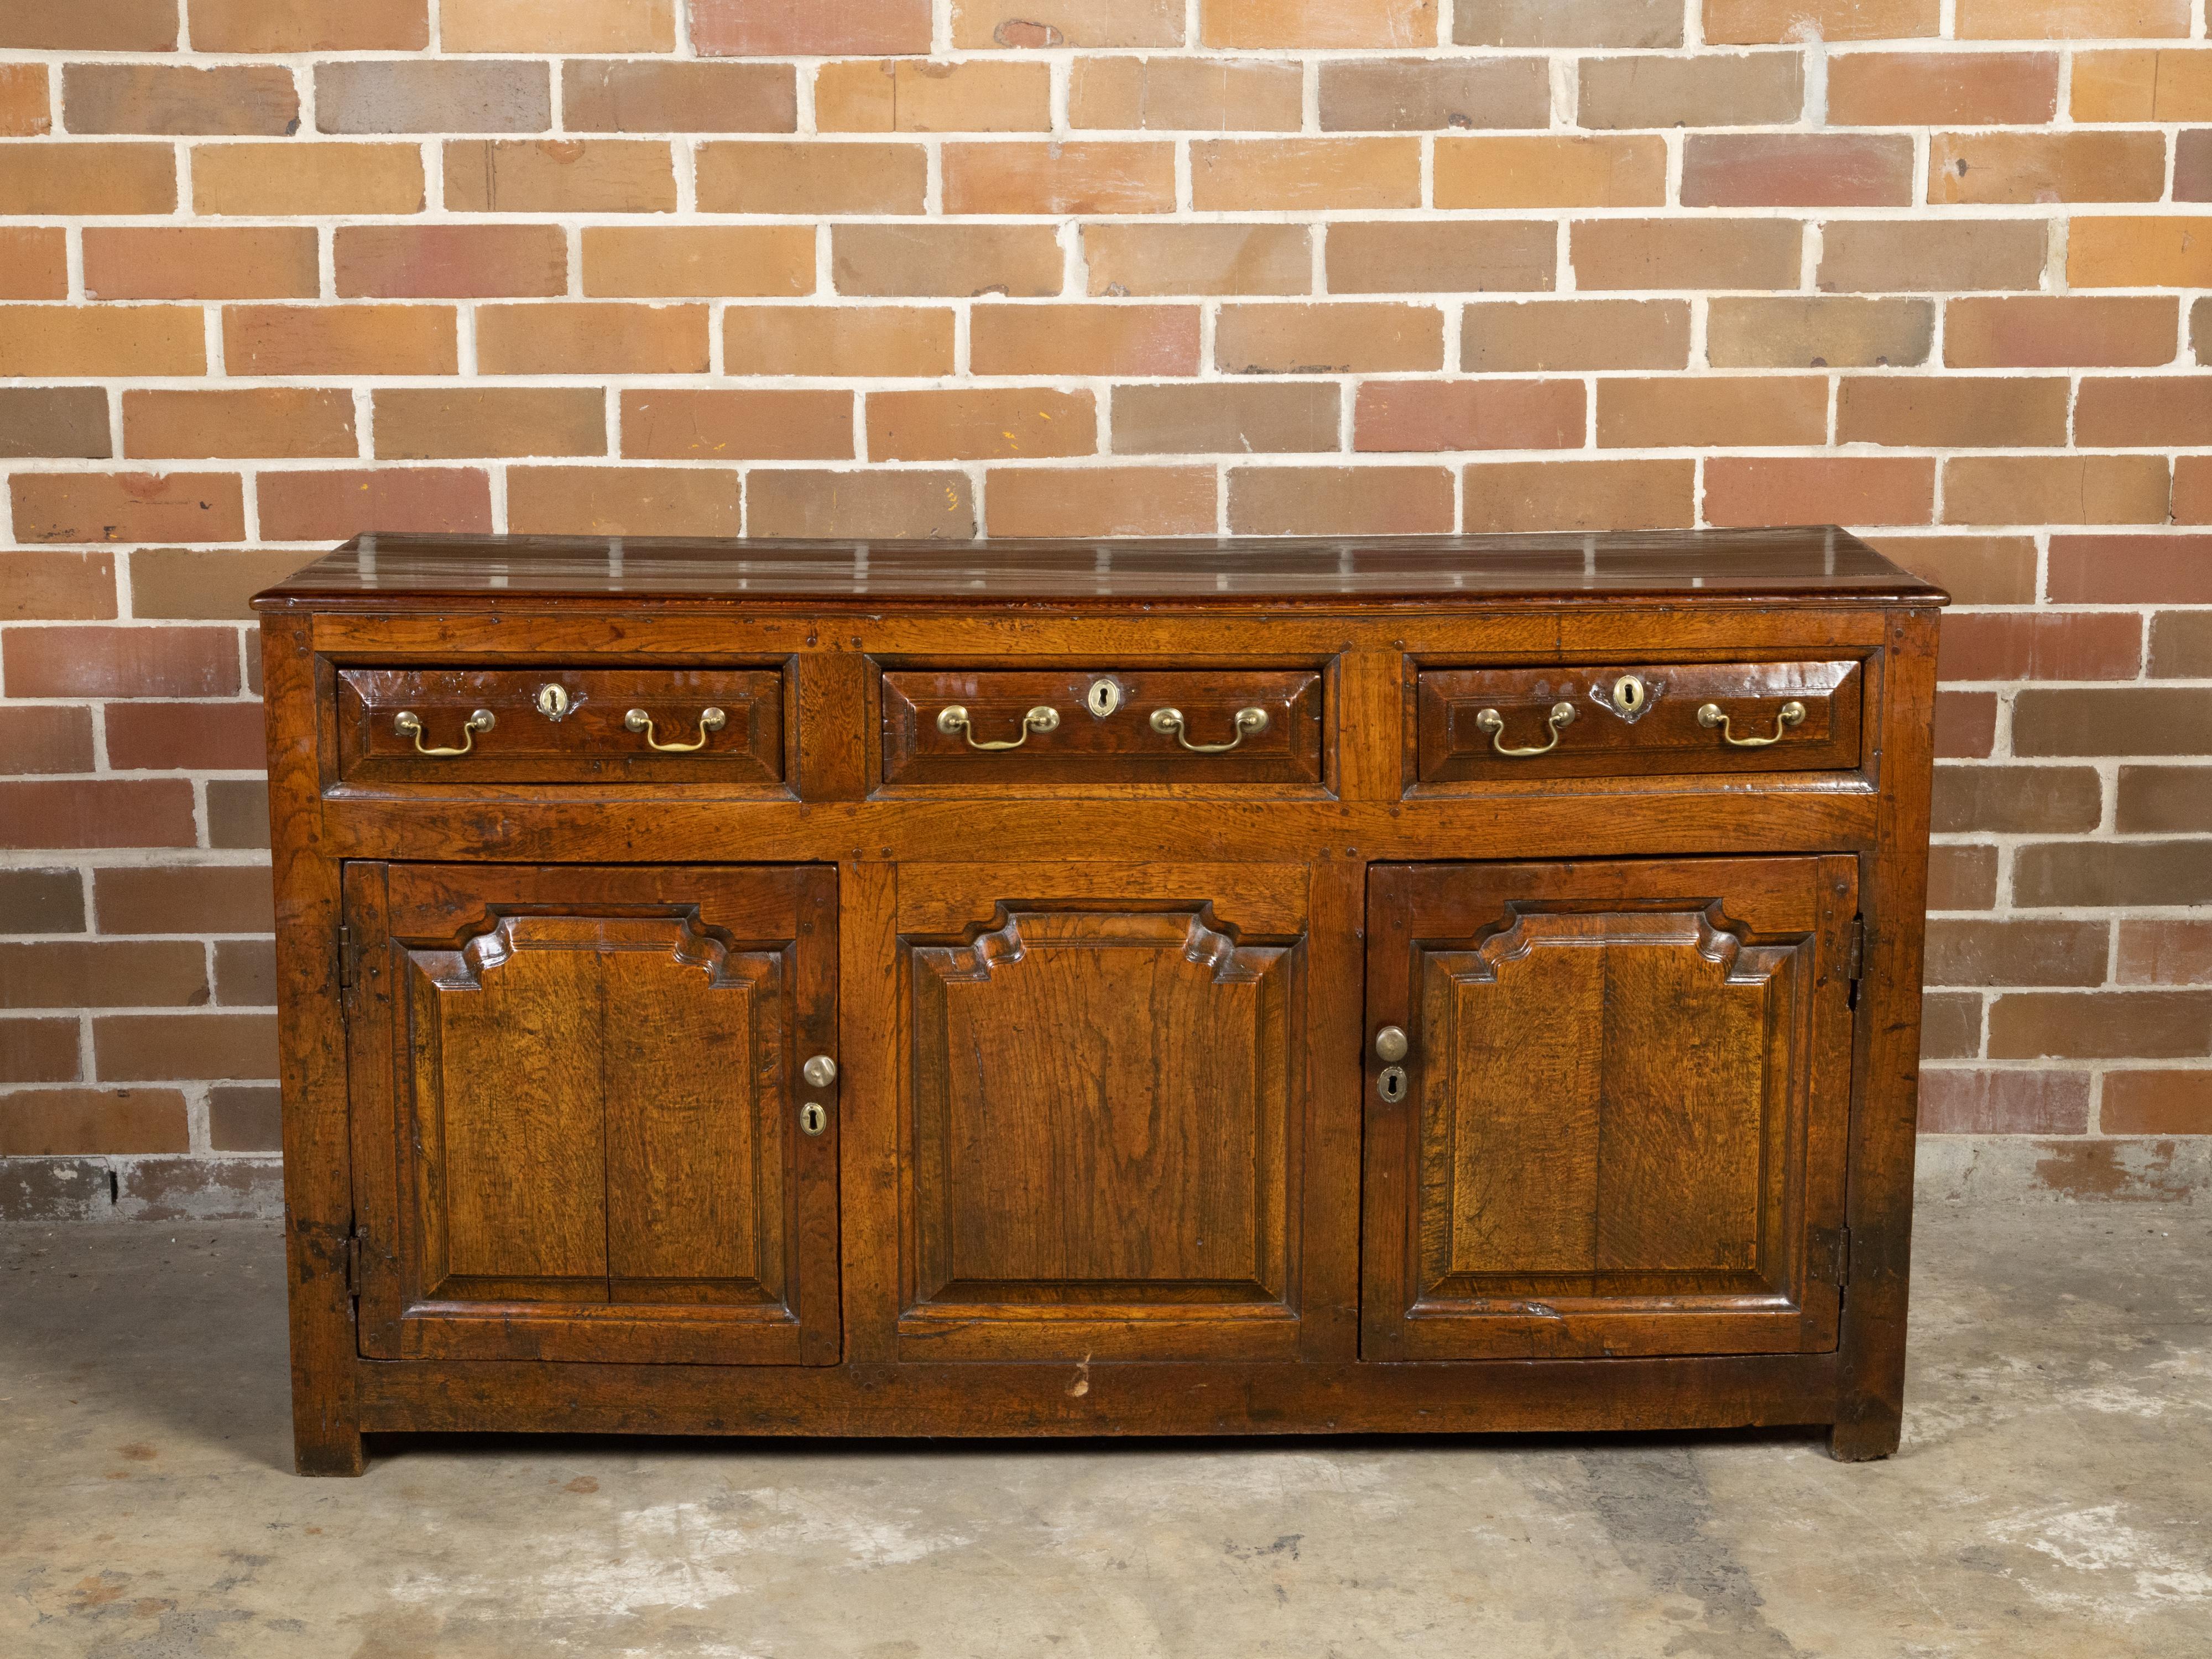 An English Georgian period oak dresser base from the early 19th century with three drawers, two doors, carved panels and brass hardware. Created in England during the Georgian period in the early years of the 19th century, this oak dresser base